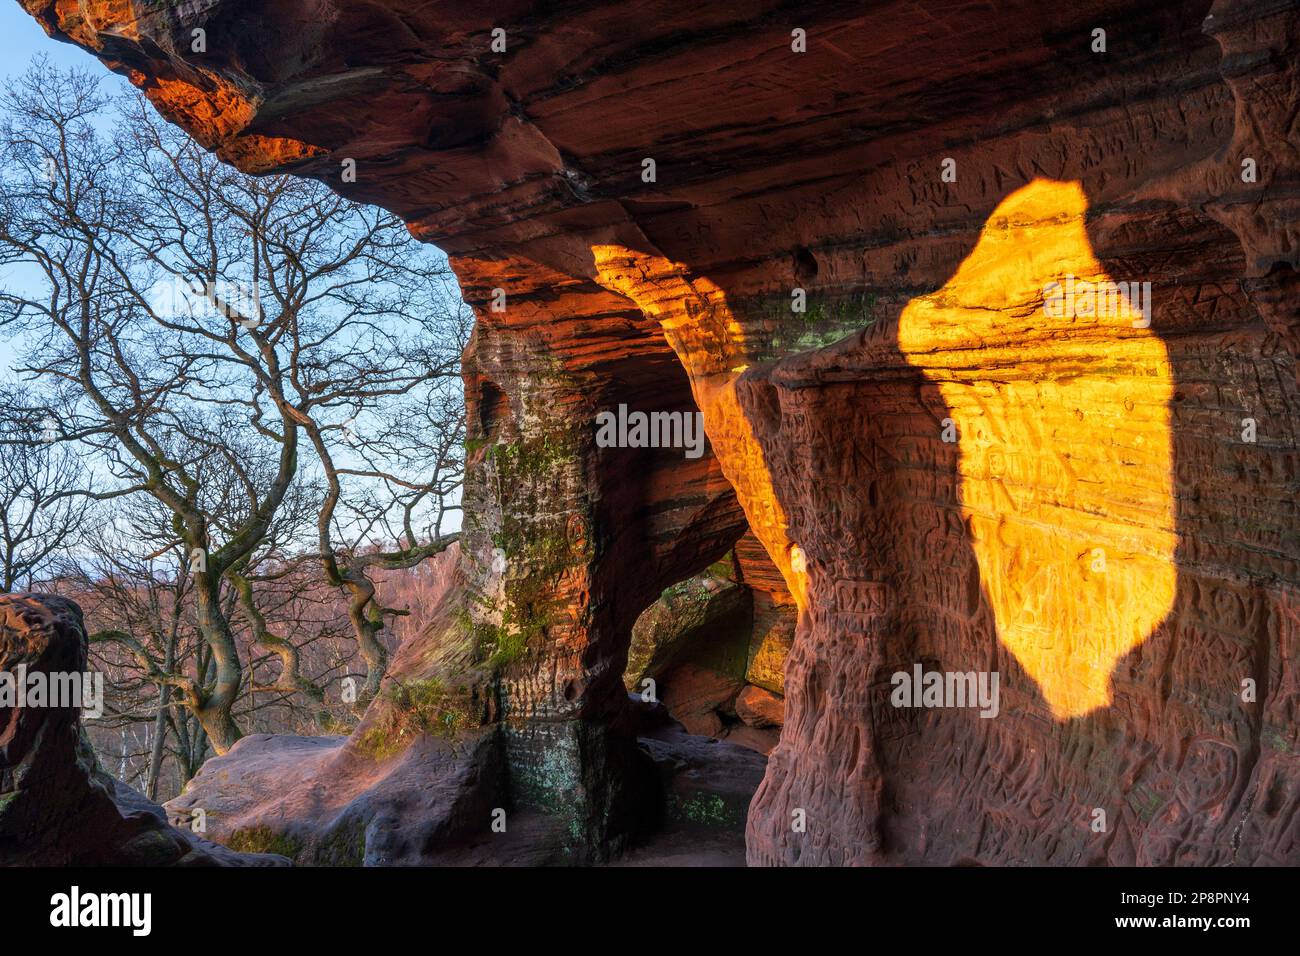 England, West Midlands, Kinver Edge. Carved graffiti in the sandstone walls of the caves in Nannys Rock. Stock Photo